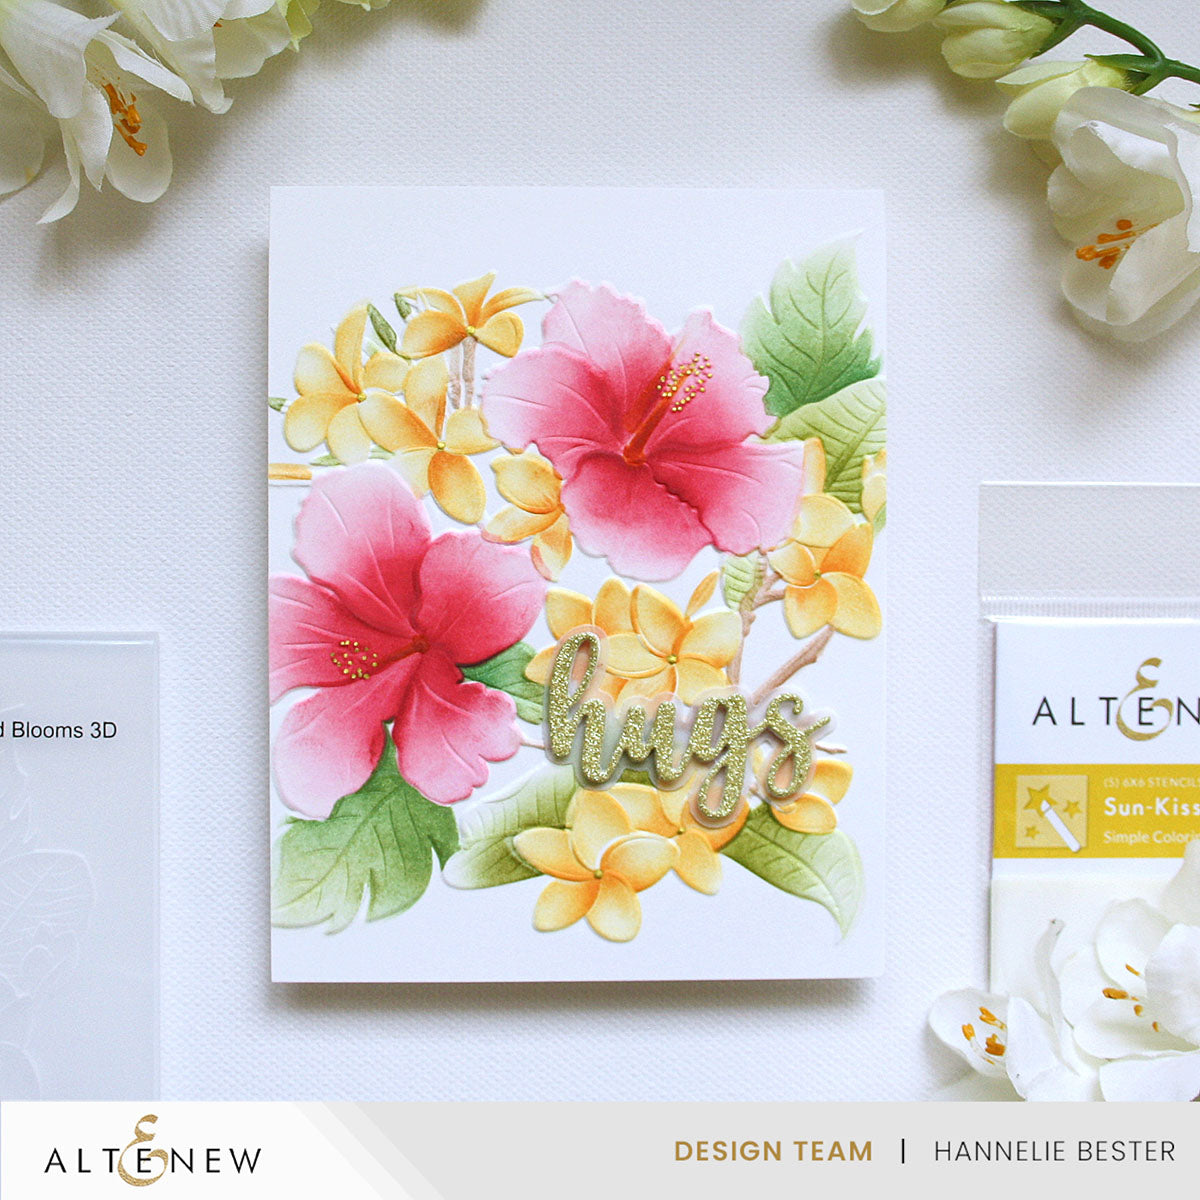 Altenew - Sun-Kissed Blooms 3D Embossing Folder and Stencil Bundle